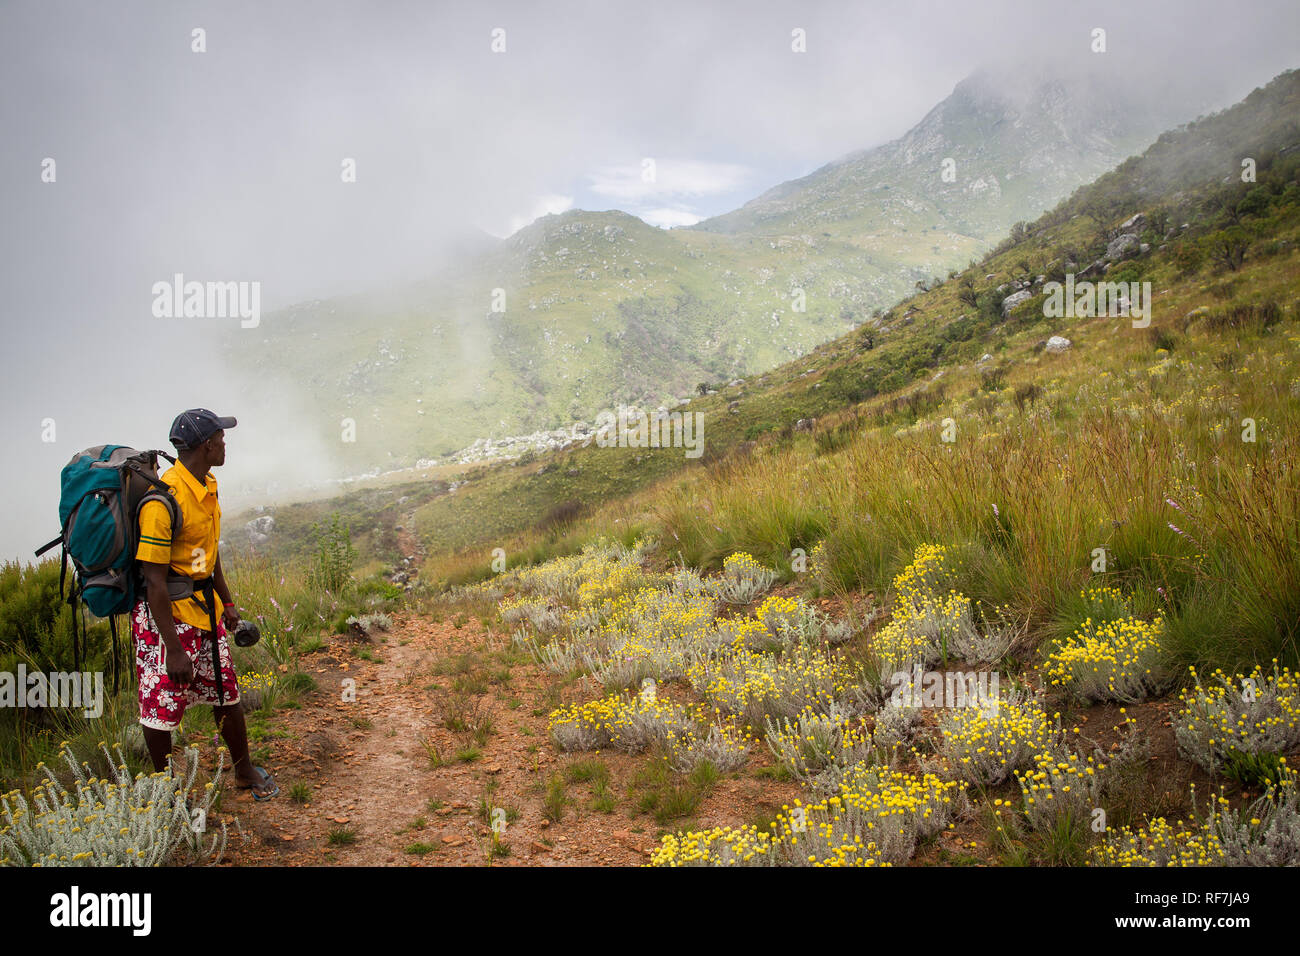 Mount Mulanje, a giant massif in southern district, Malawi, is the tallest mountain in south central Africa and consists of a network of hiking trails Stock Photo